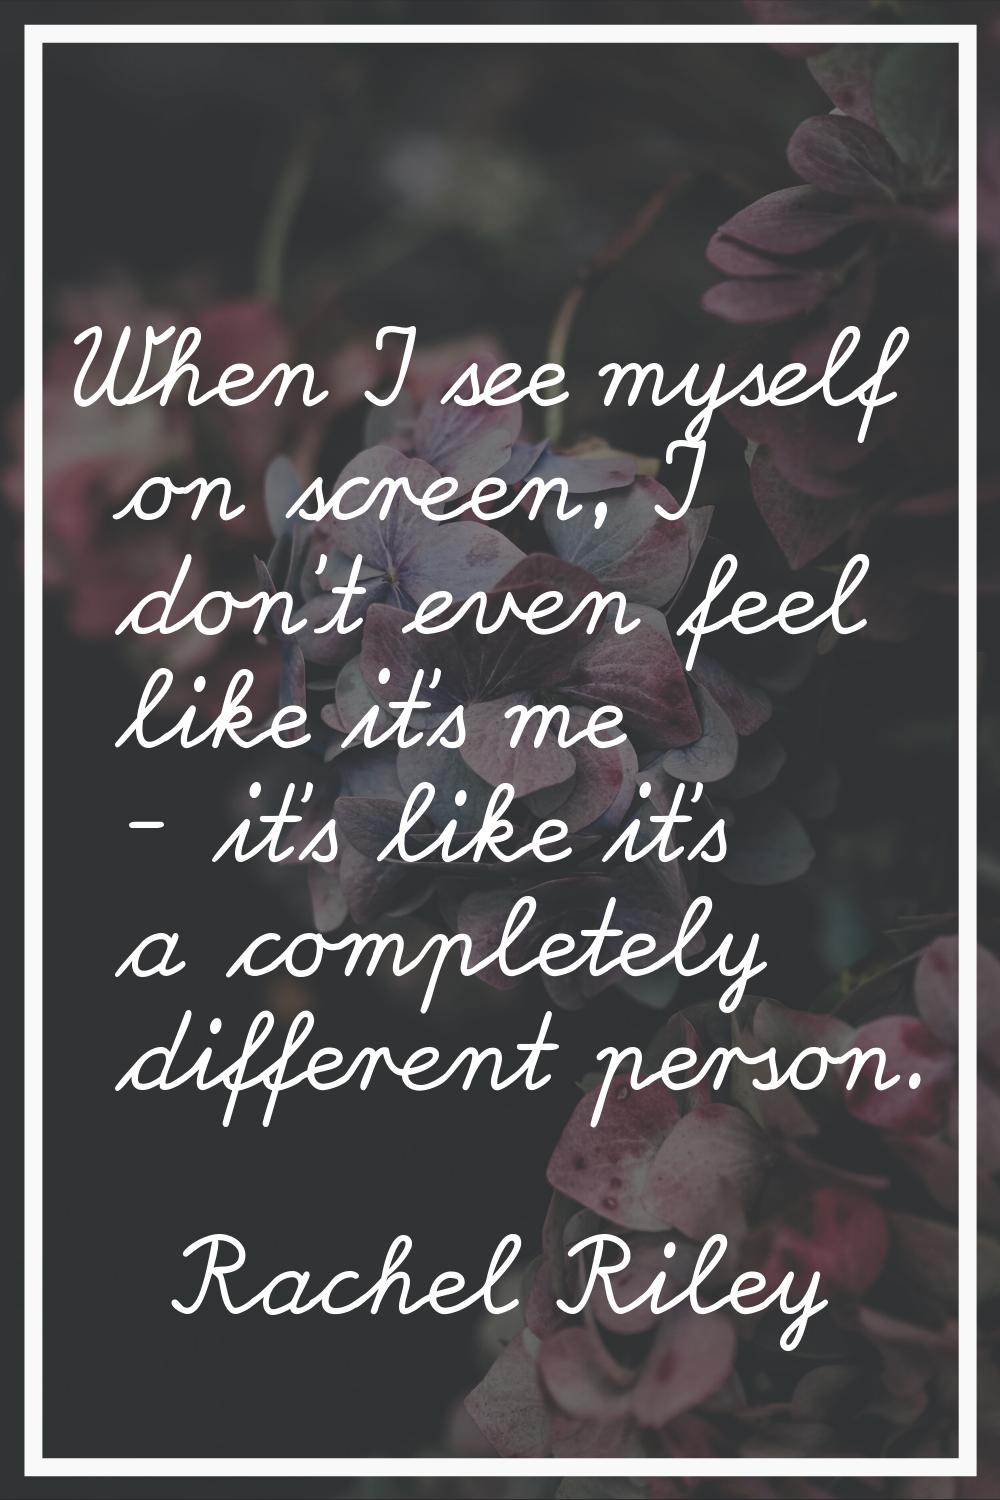 When I see myself on screen, I don't even feel like it's me - it's like it's a completely different